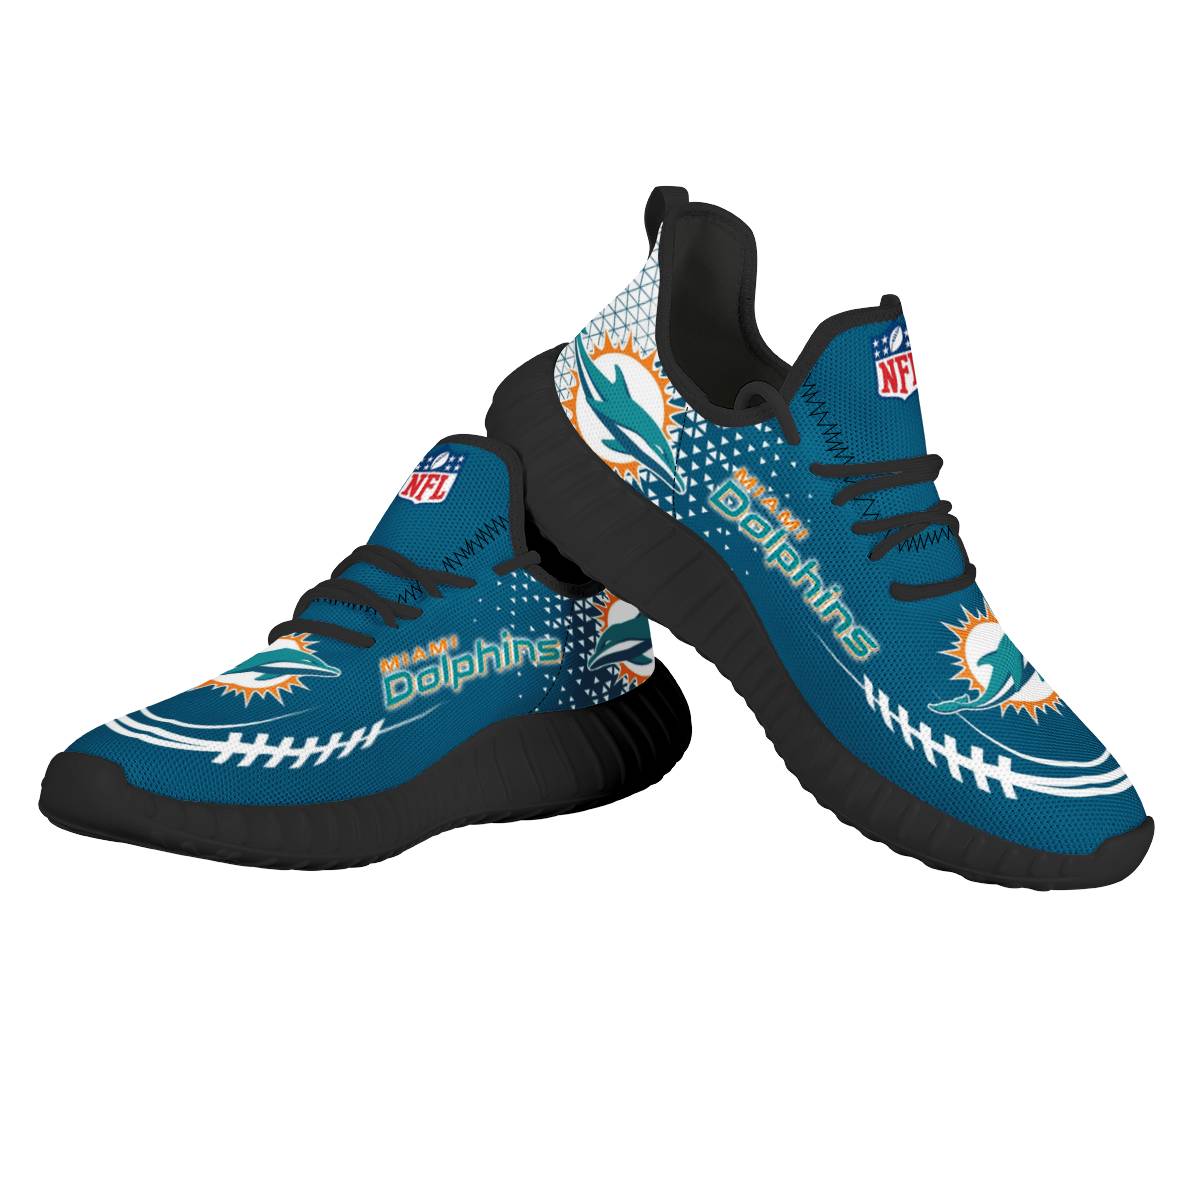 Men's Miami Dolphins Mesh Knit Sneakers/Shoes 001